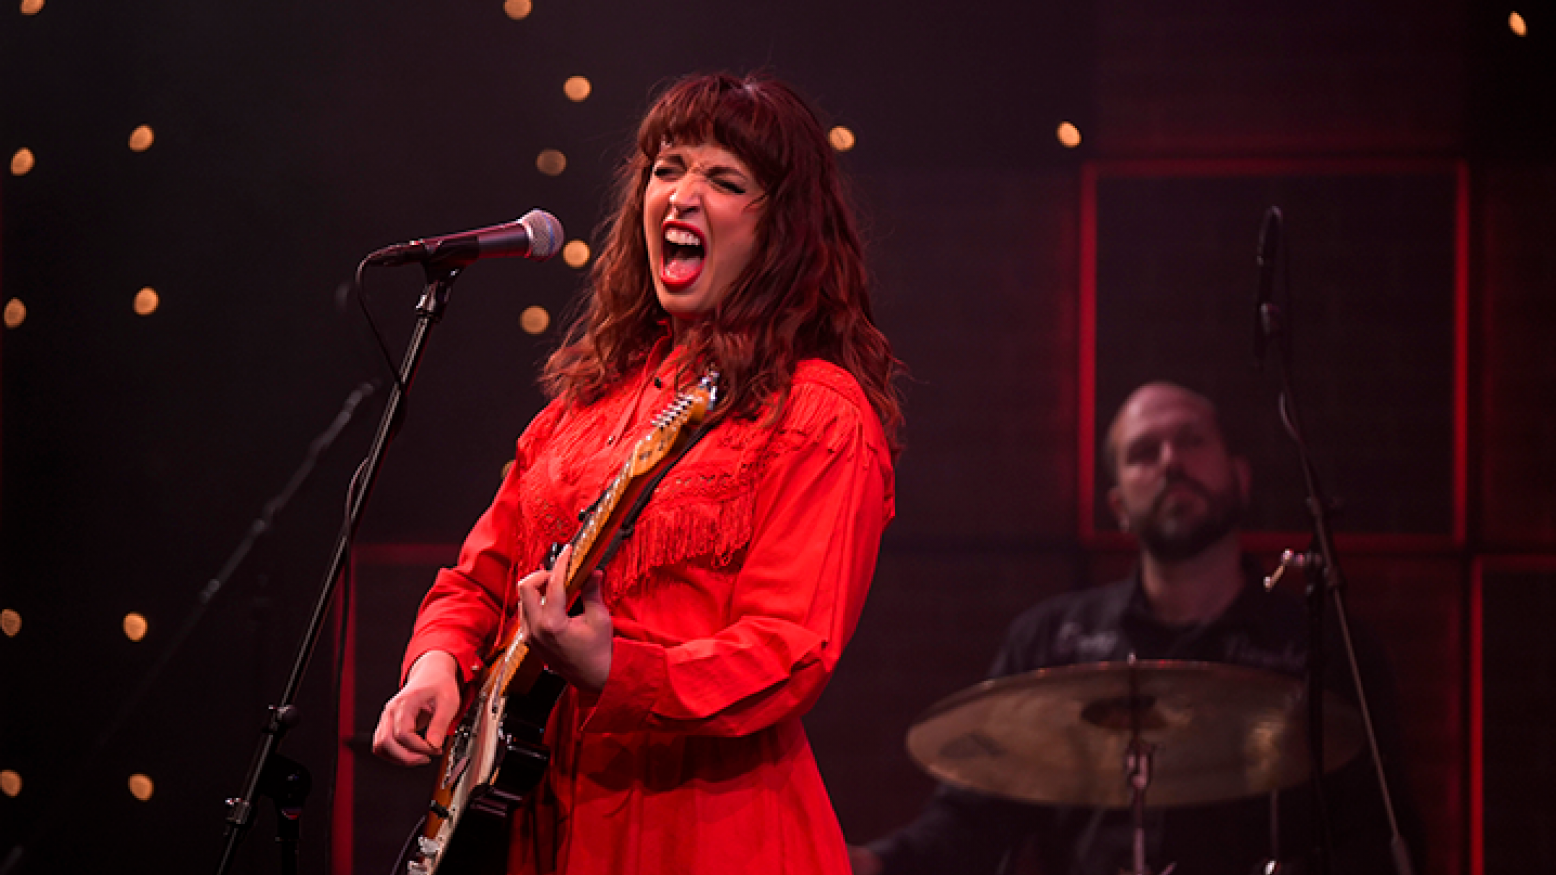 An image of Elizabeth Moen performing on the Studio 3 LIVE set. She has long red hair, is wearing a red long-sleeved dress and is playing a guitar while singing into a microphone. In the background, a bald man with a beard is seated playing the drums.